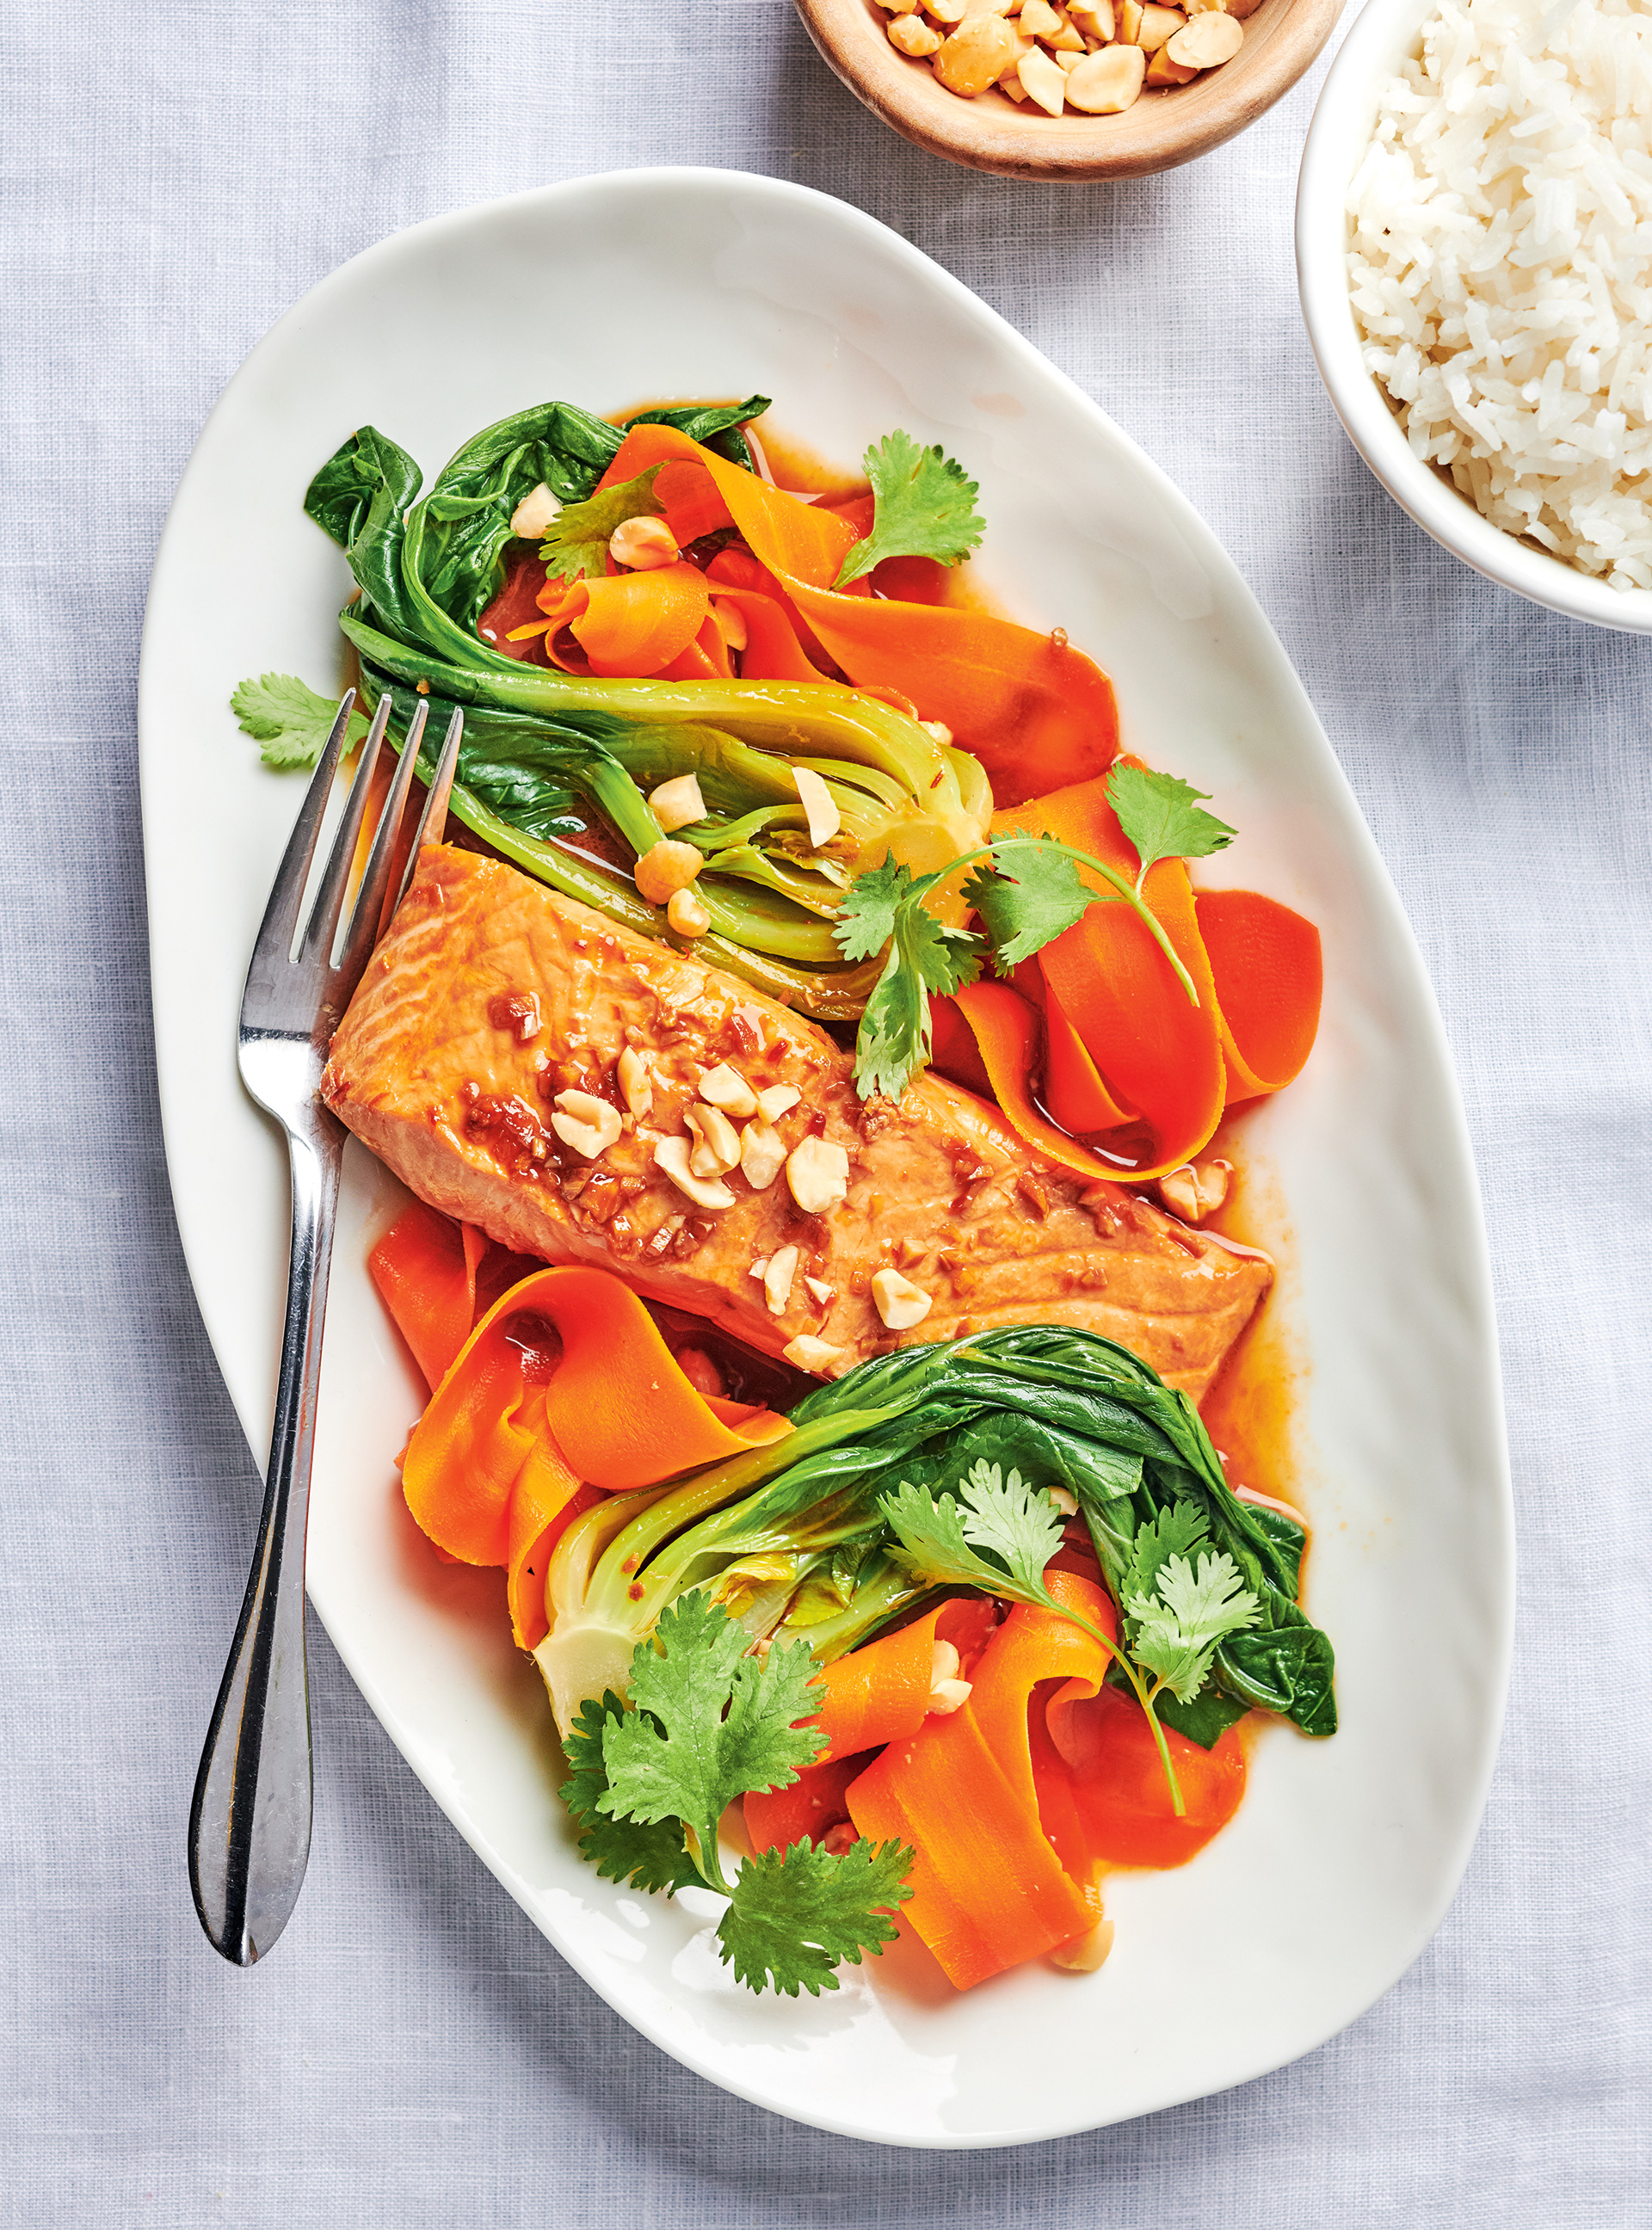 Ginger-Glazed Salmon with Bok Choy and Carrots